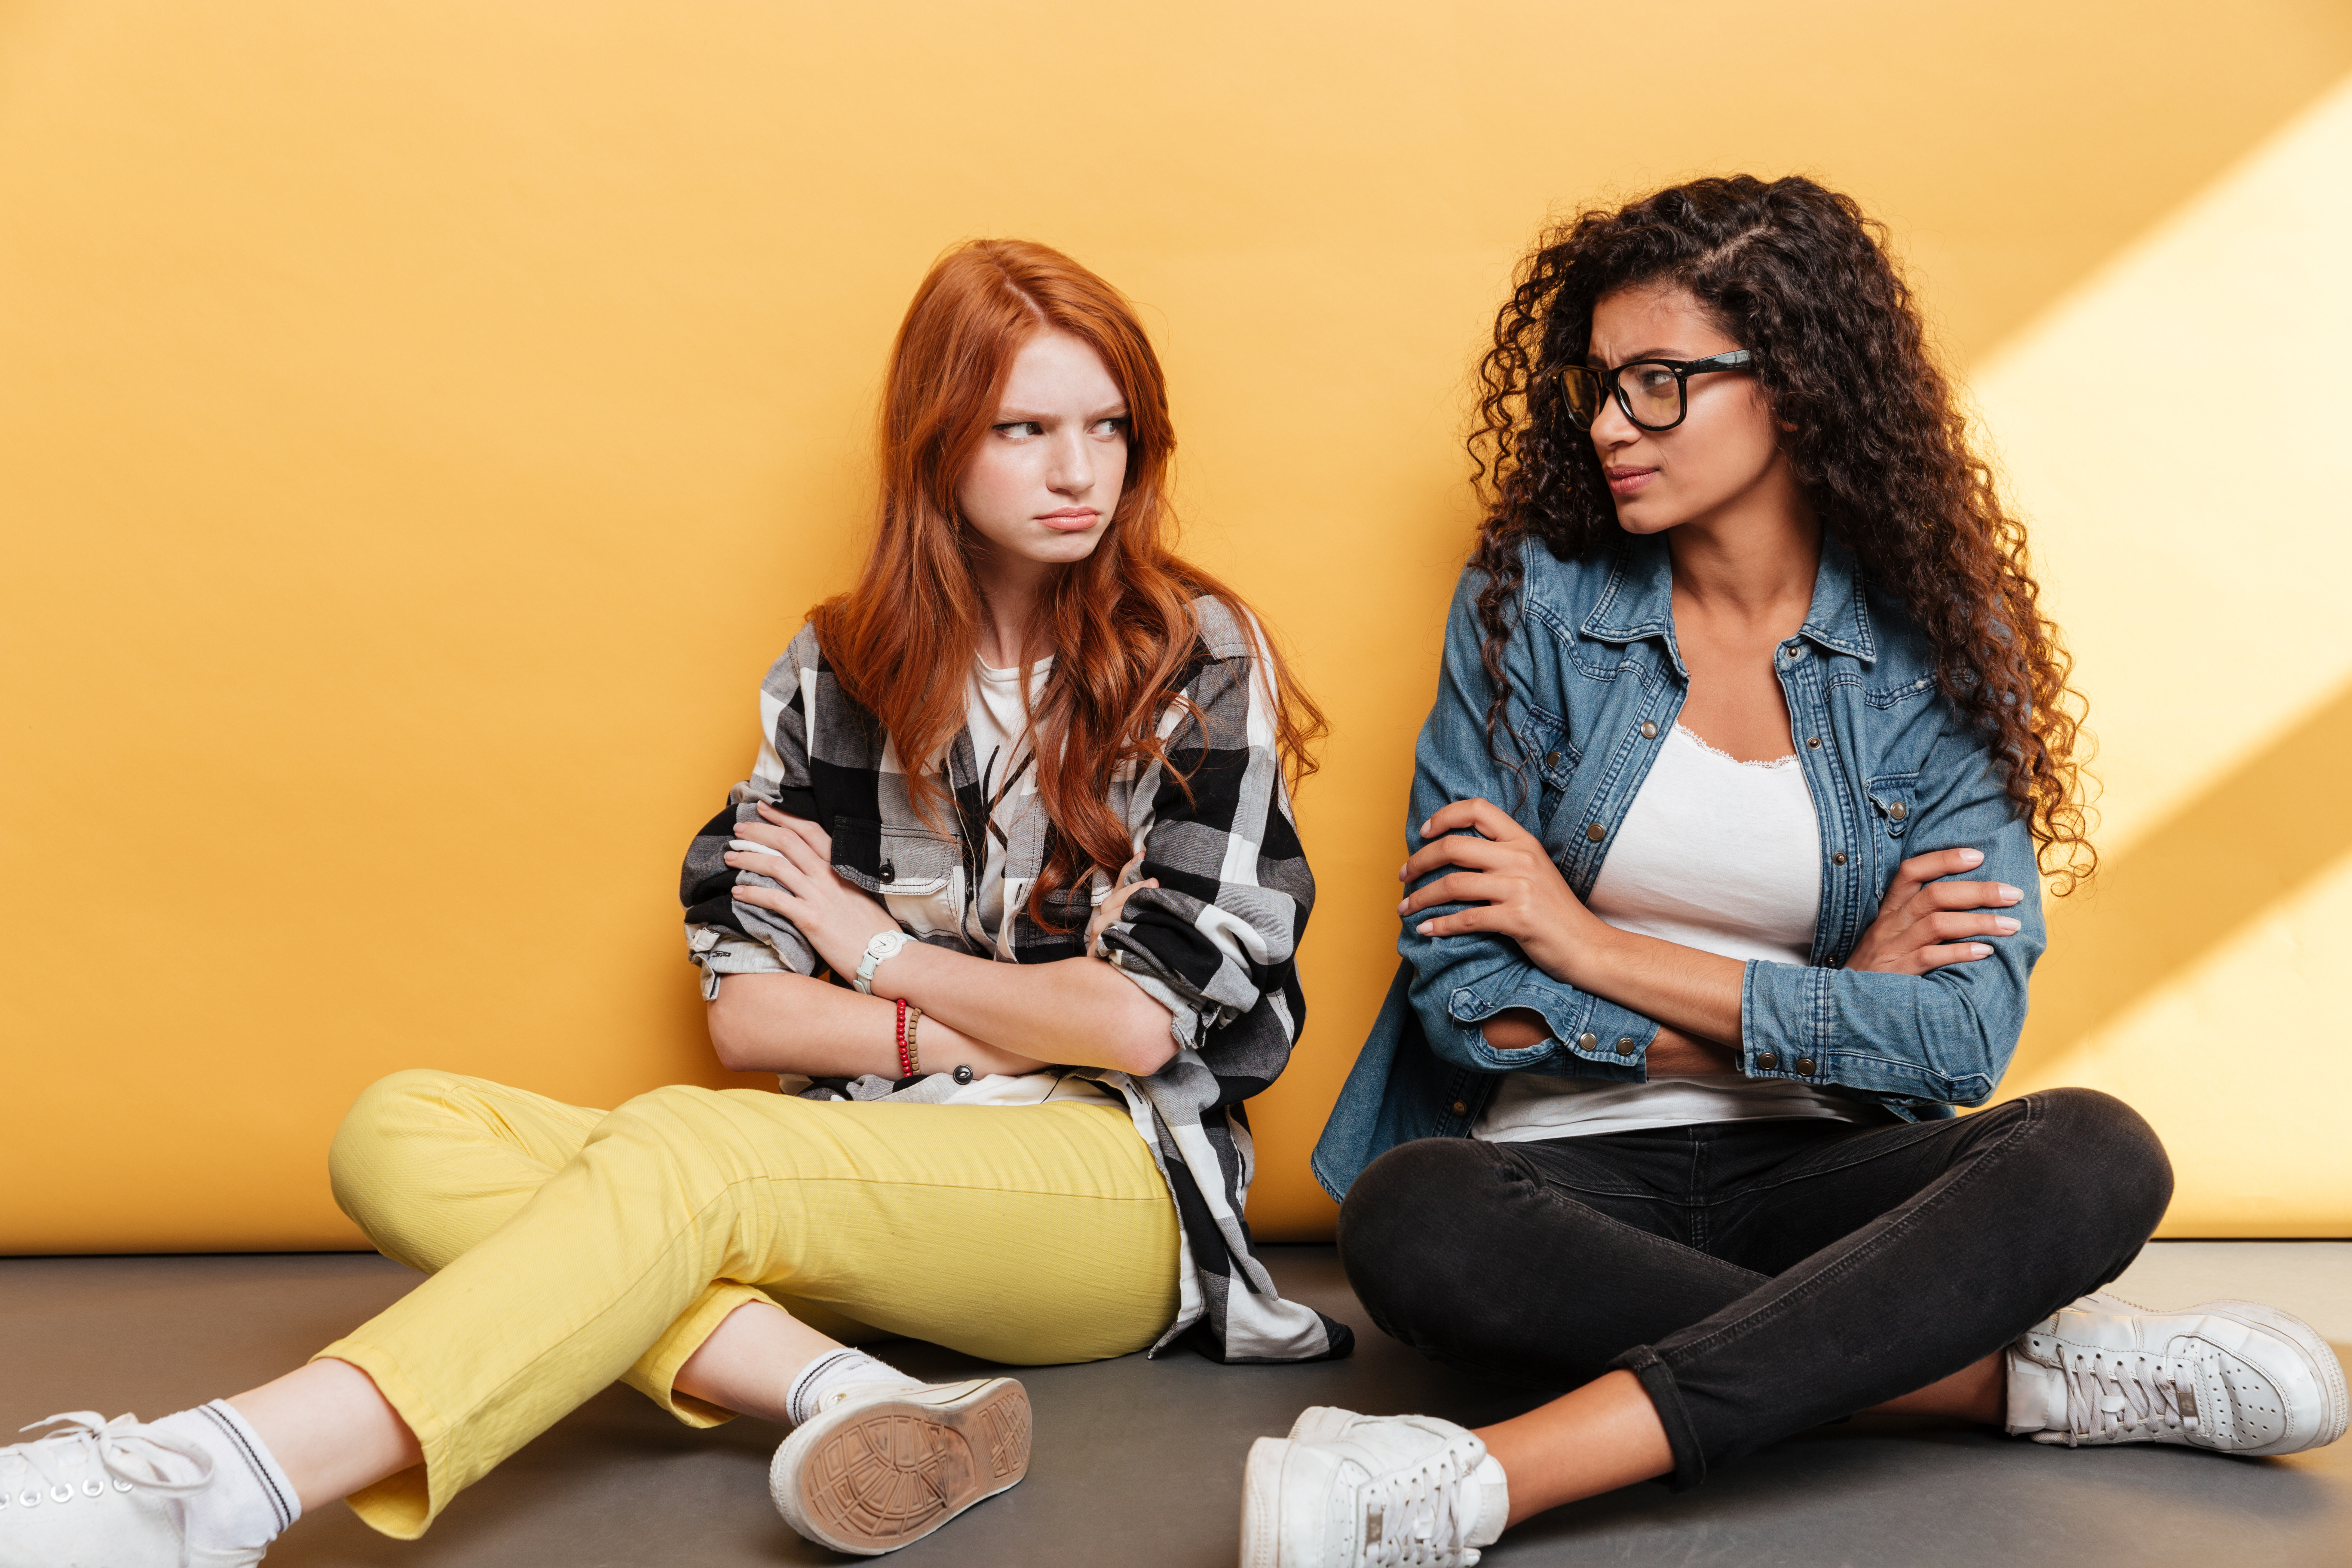 Two sad offended young women sitting with arms crossed